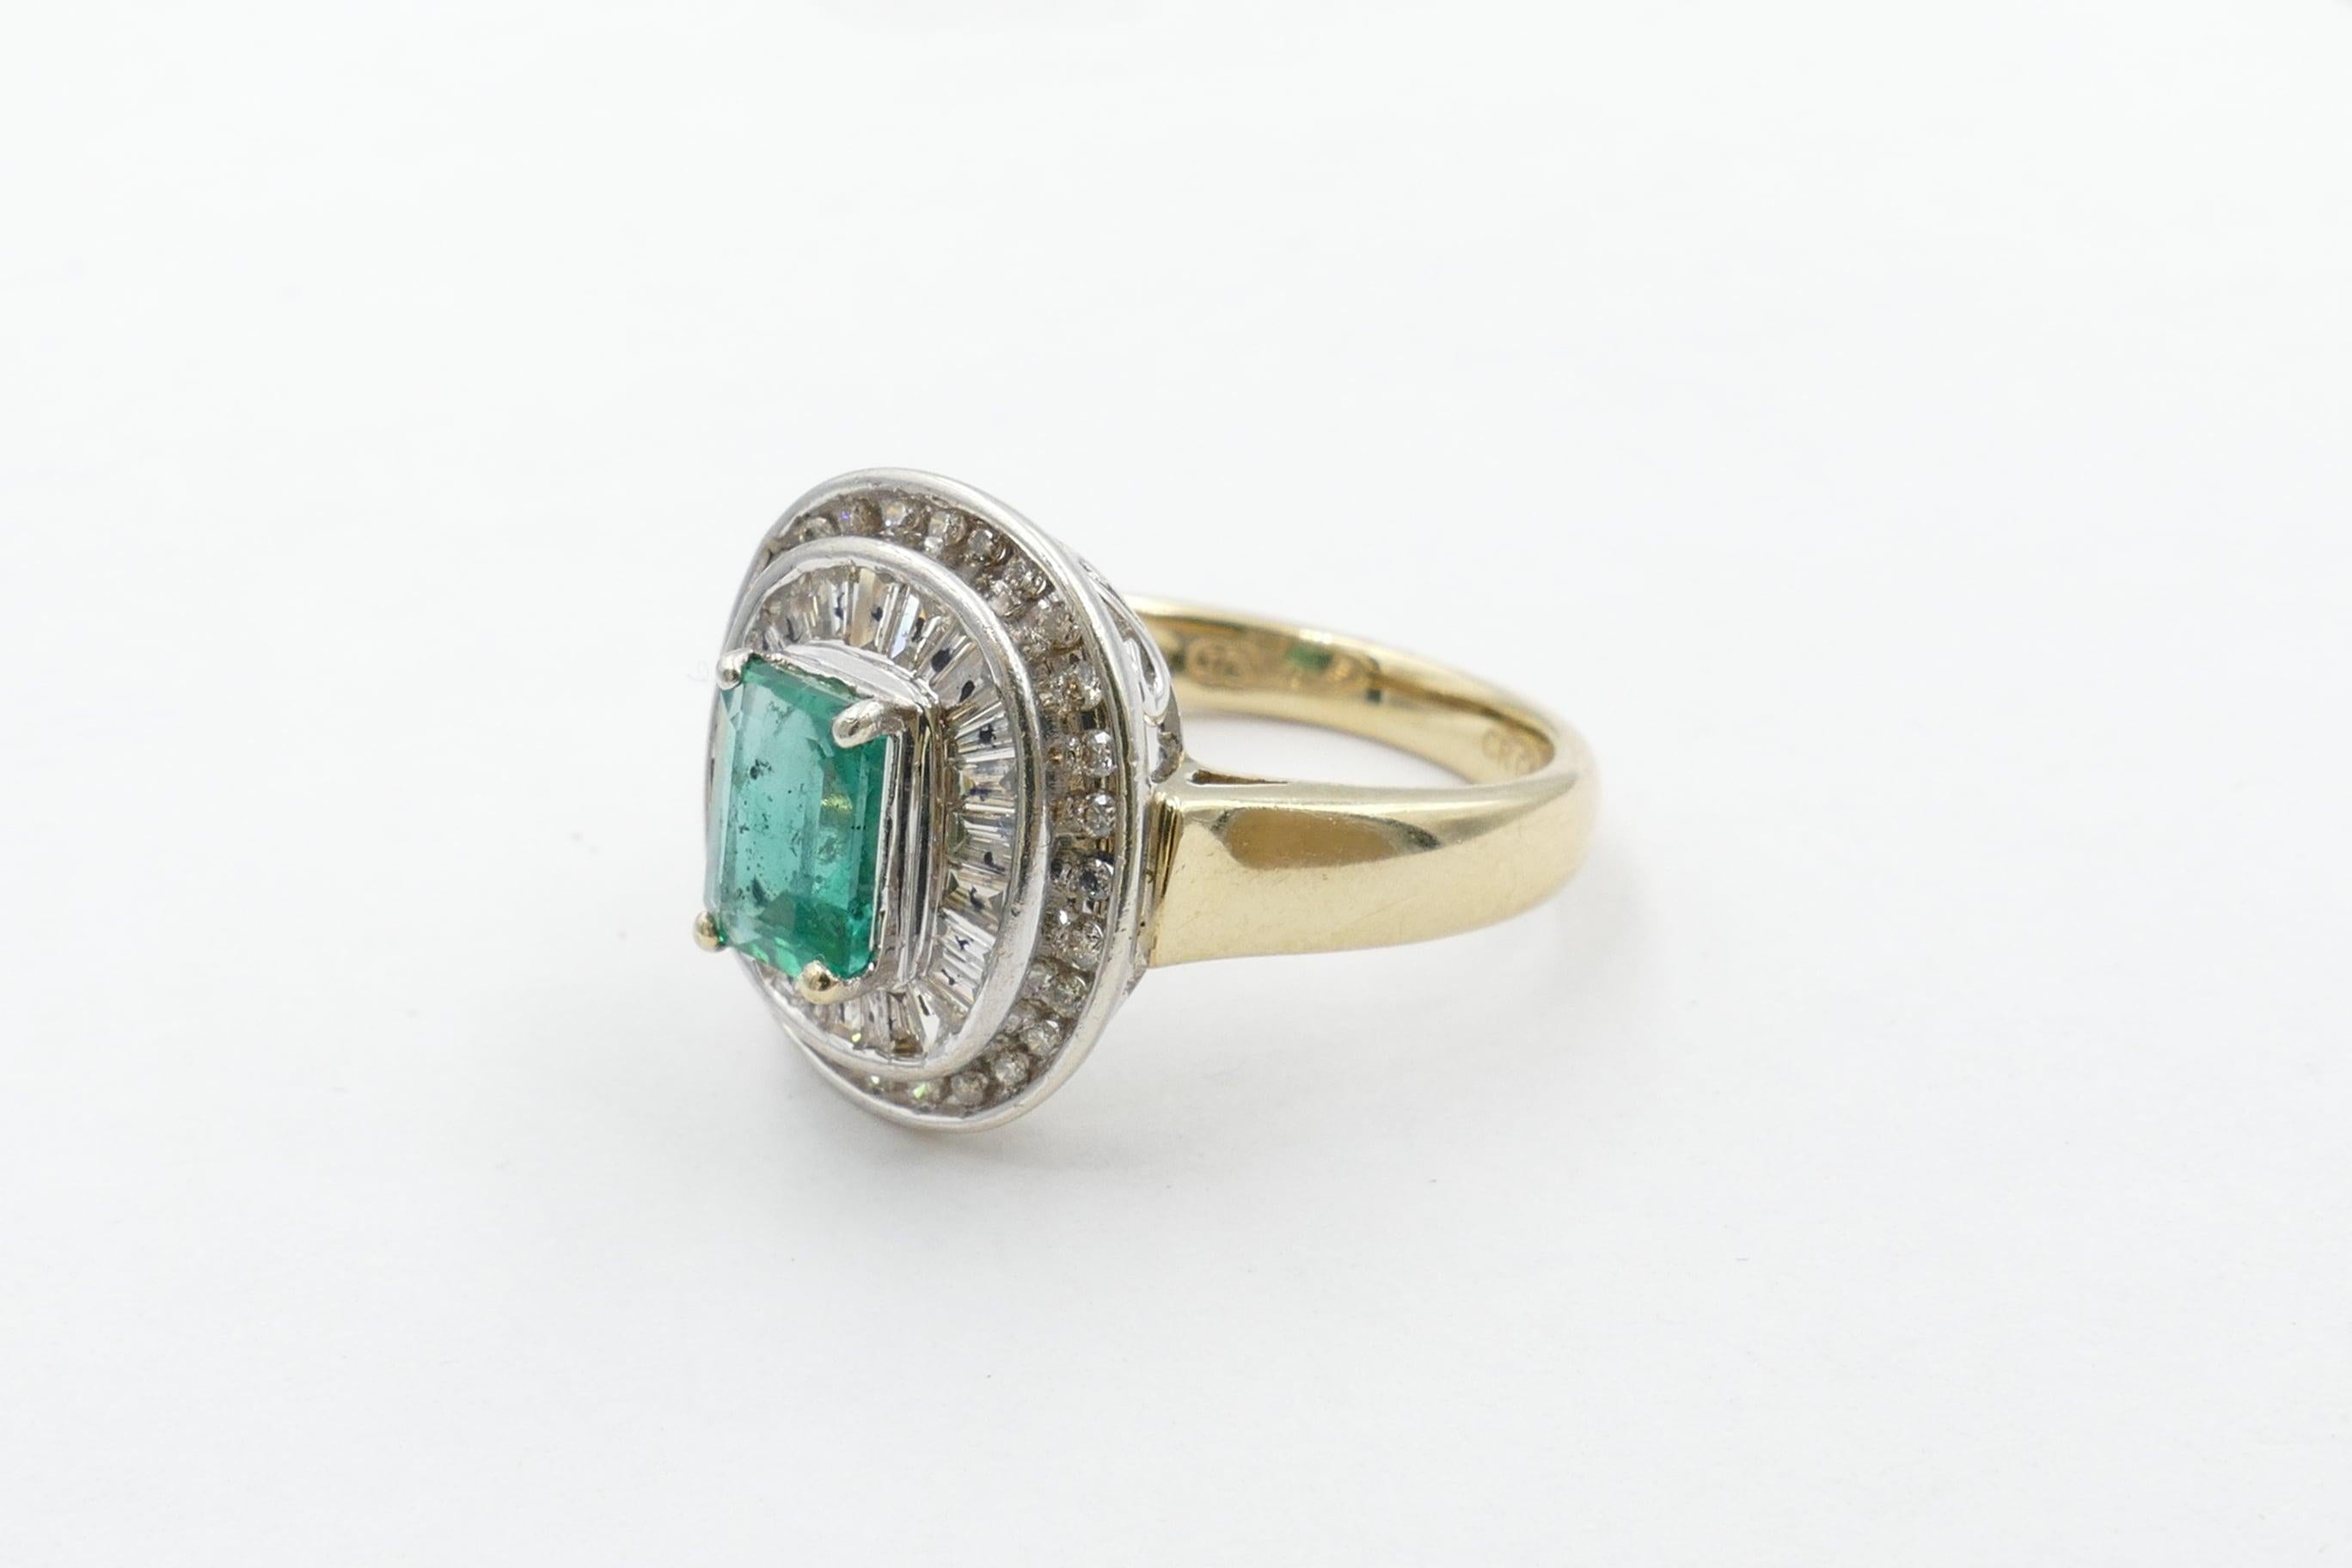 The beautiful colour Emerald centering this Ring is close to 1 carat, bluish-green in Colour, medium Tone, Emerald cut, , 4 claw set.
Surrounding the Stone are 26 tapered Baguette Cut Diamonds, Colour H/J, Clarity SI1-SI2 with a further 28 Round